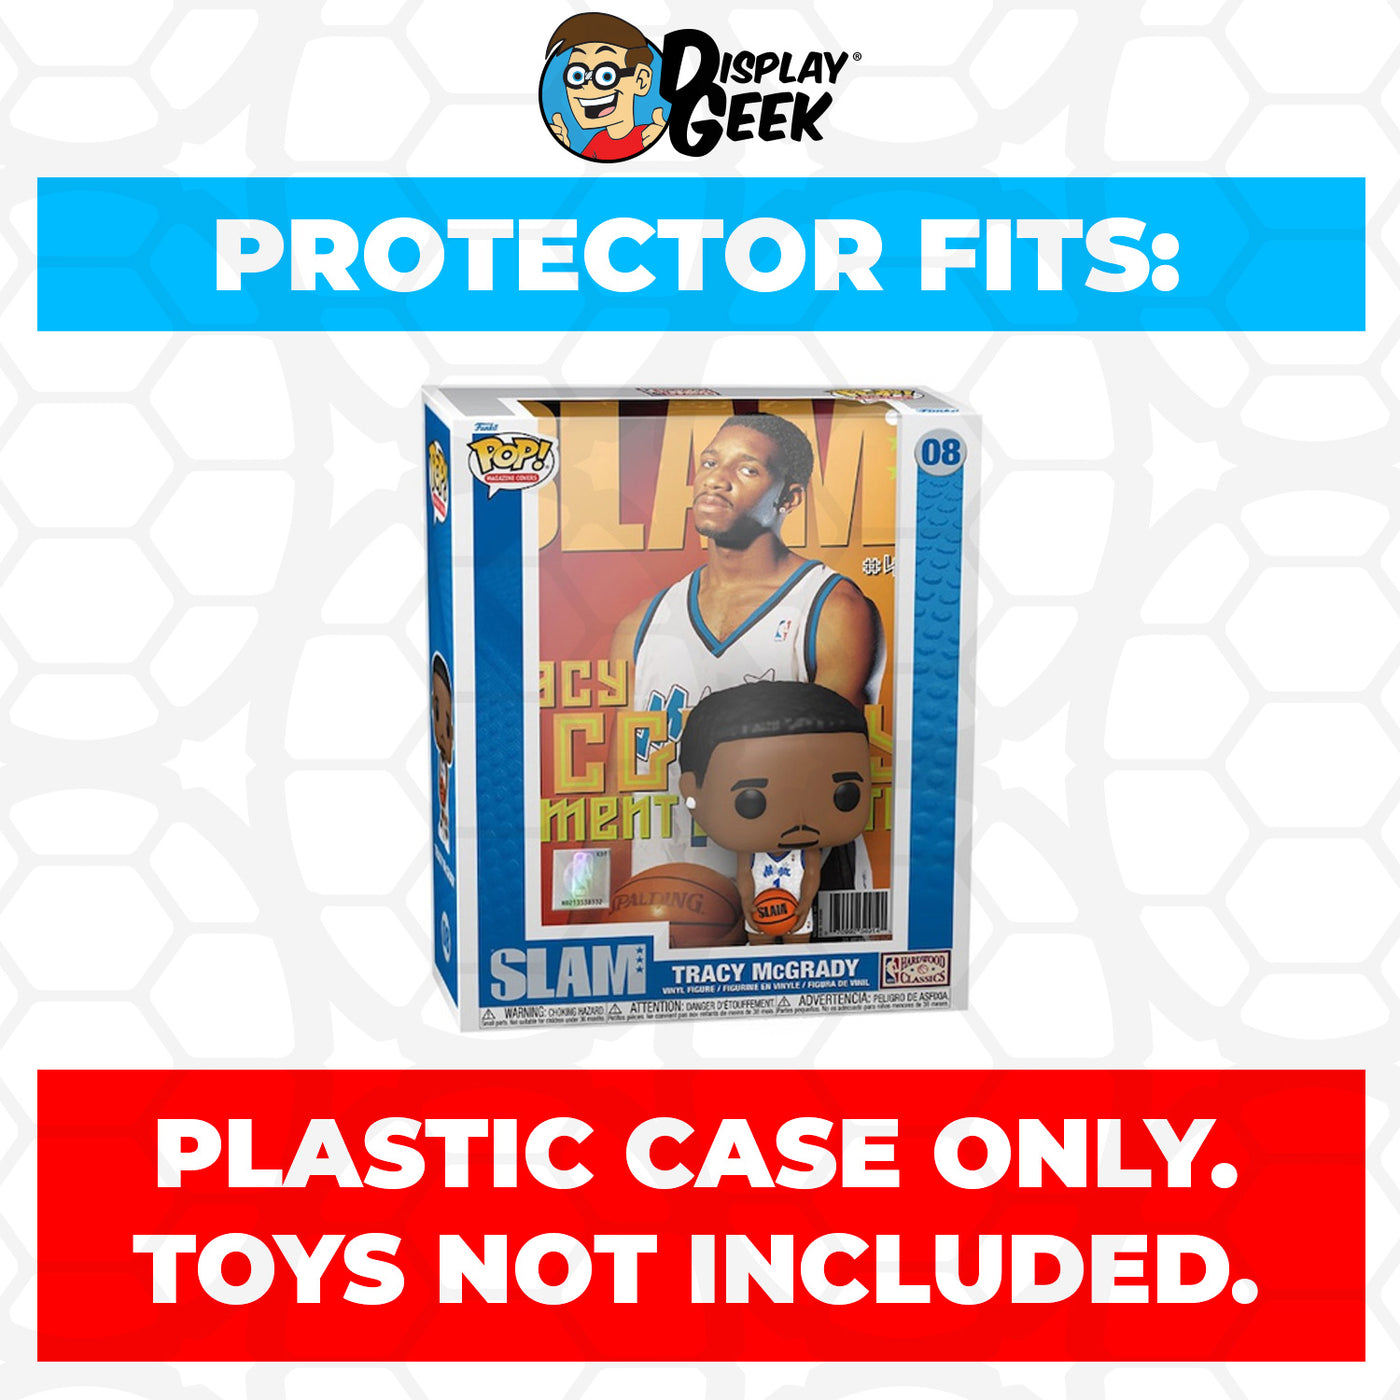 Pop Protector for Tracy McGrady #08 Funko Pop Magazine Covers on The Protector Guide App by Display Geek